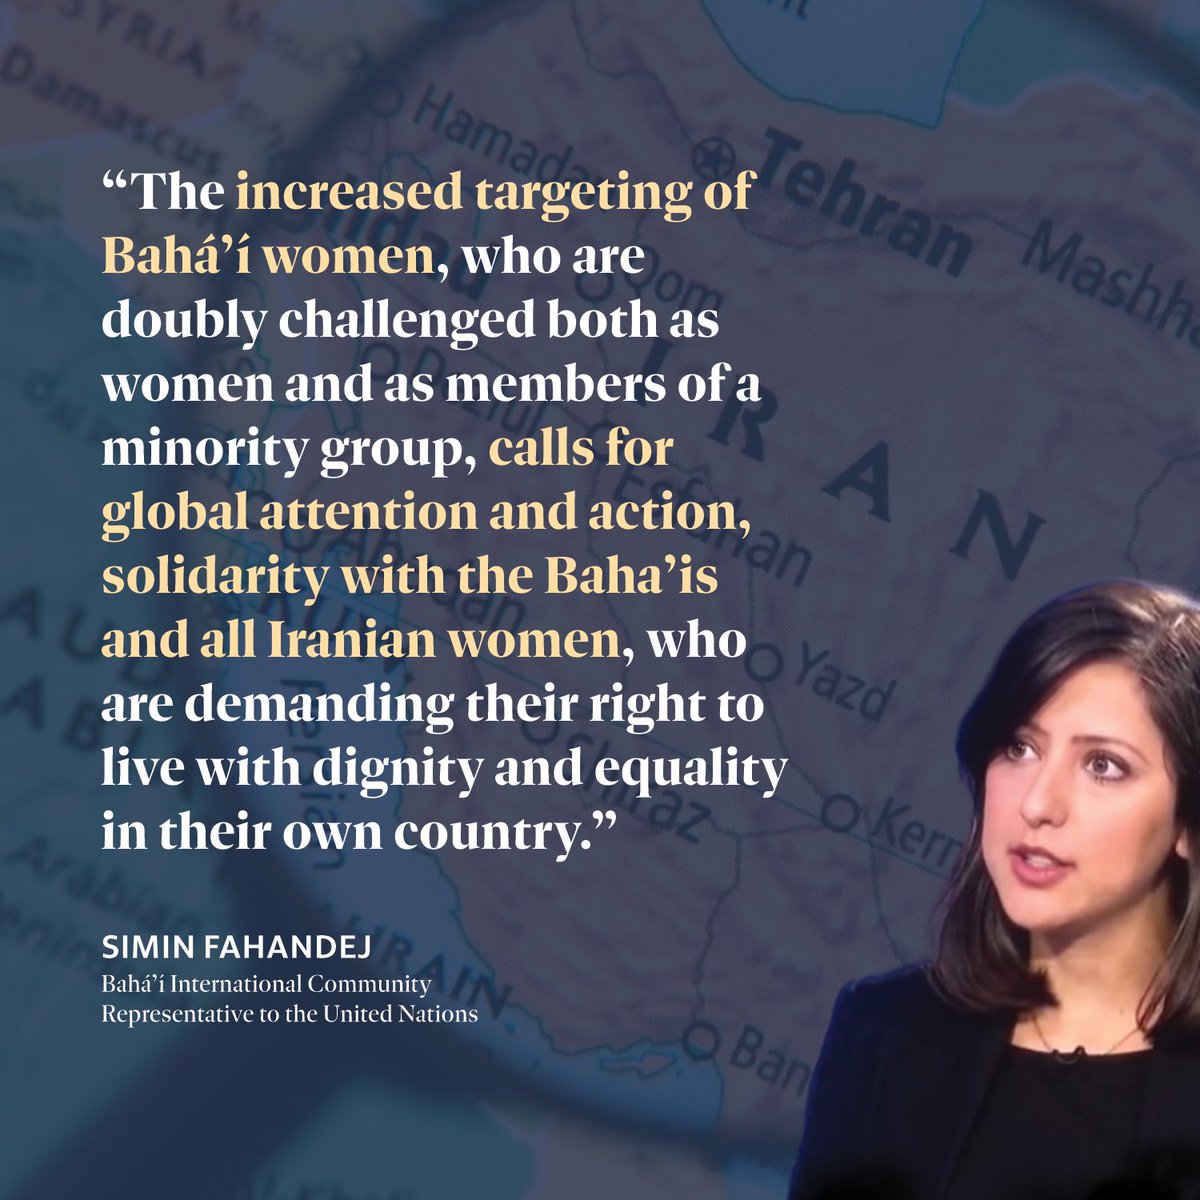 Baha’i Women Under Attack in Iran
A surge in attacks on #Bahai women across #Iran has seen 65 women, out of 85 people—more than three-quarters—summoned to court or prison.
Our latest: bic.org/news/bahai-wom…
#HumanRights #OurStoryIsOne
📷